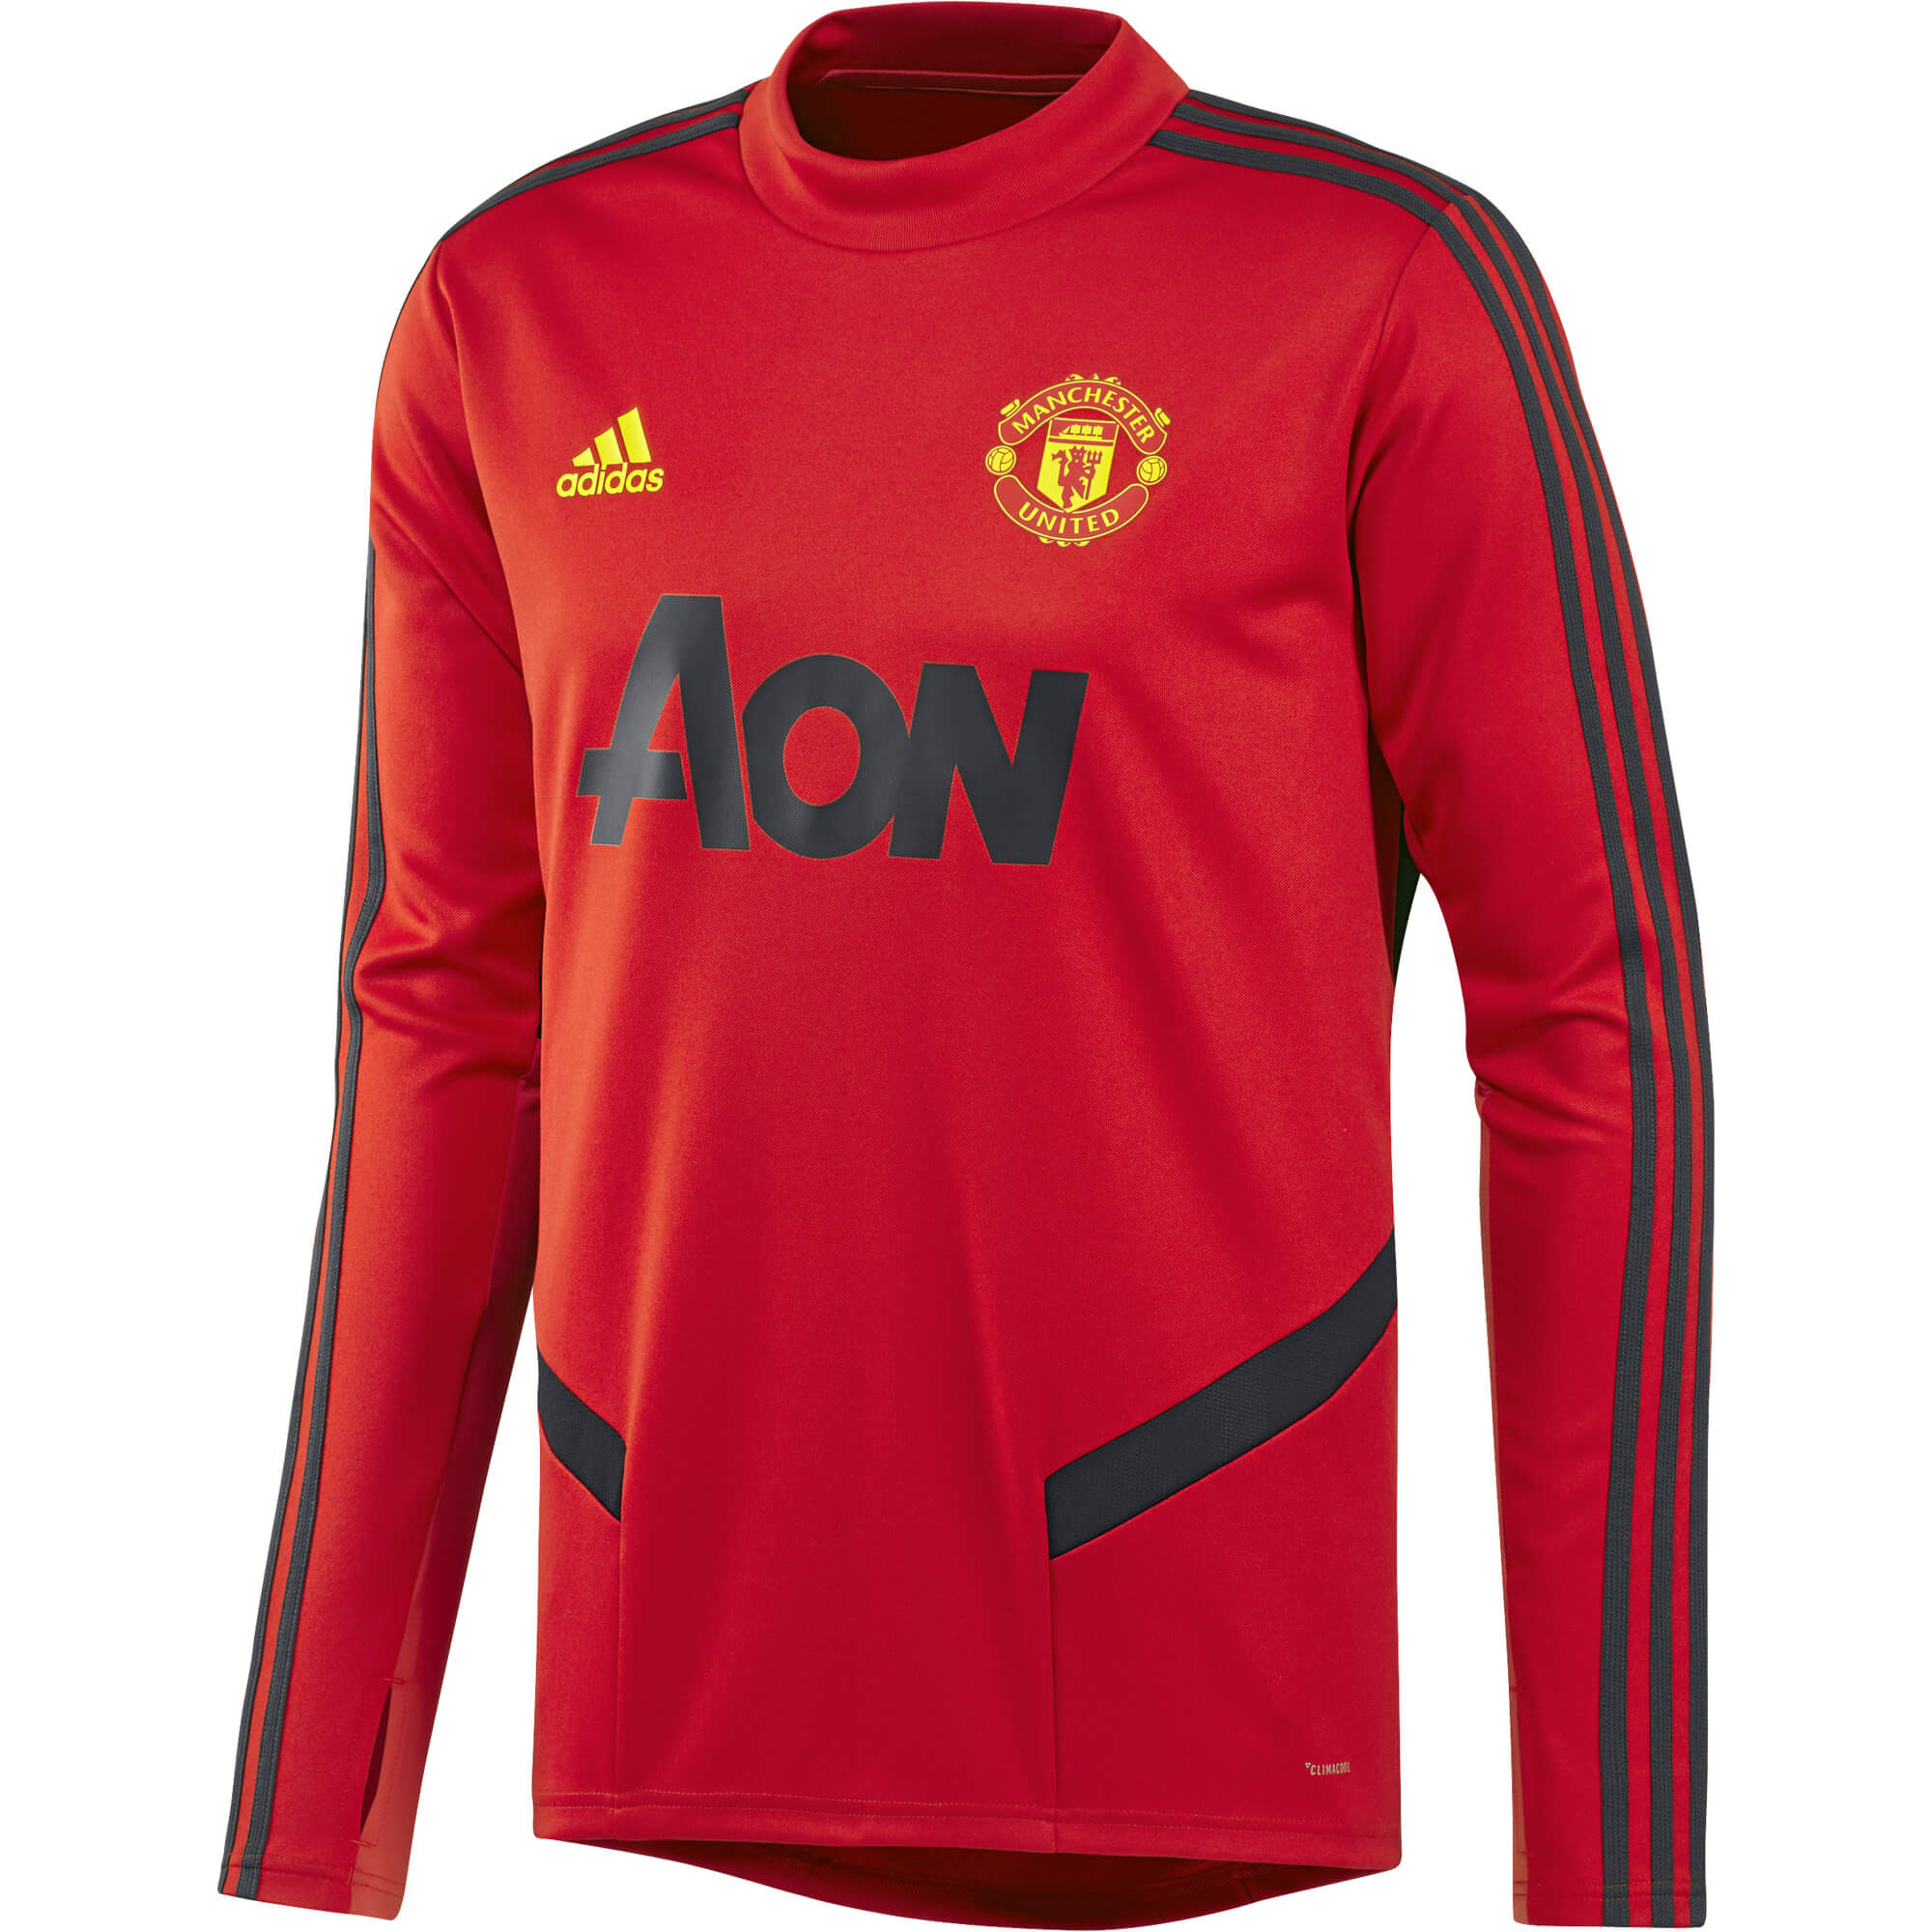 ADIDAS MANCHESTER UNITED TRG TOP ROUGE 2019/2020